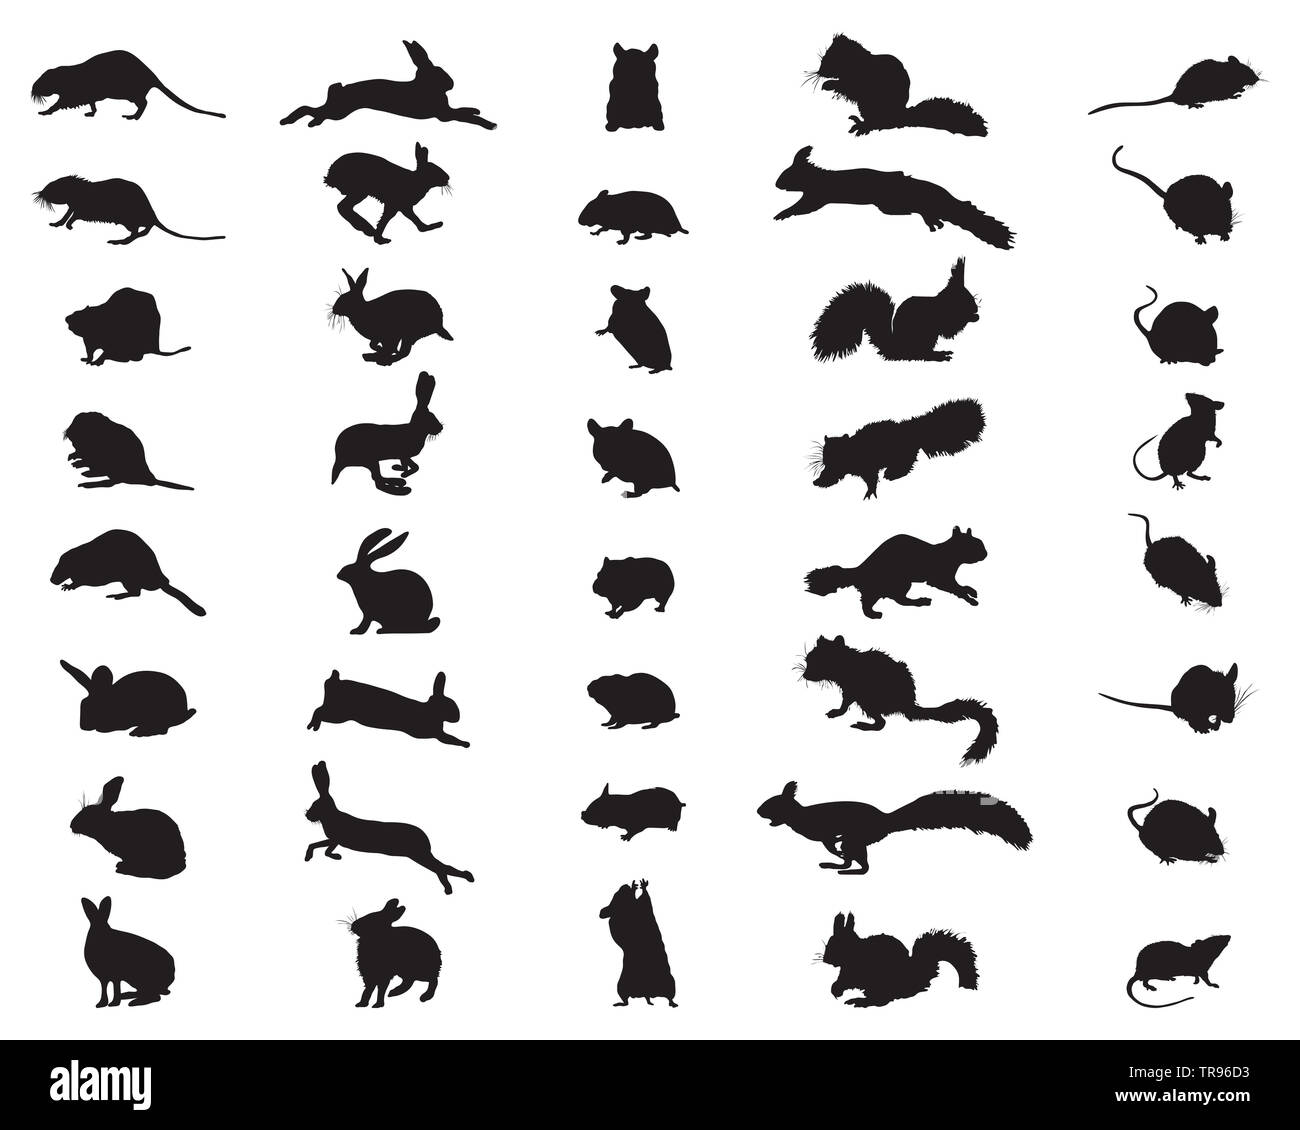 Black silhouettes of rodents on a white background Stock Photo